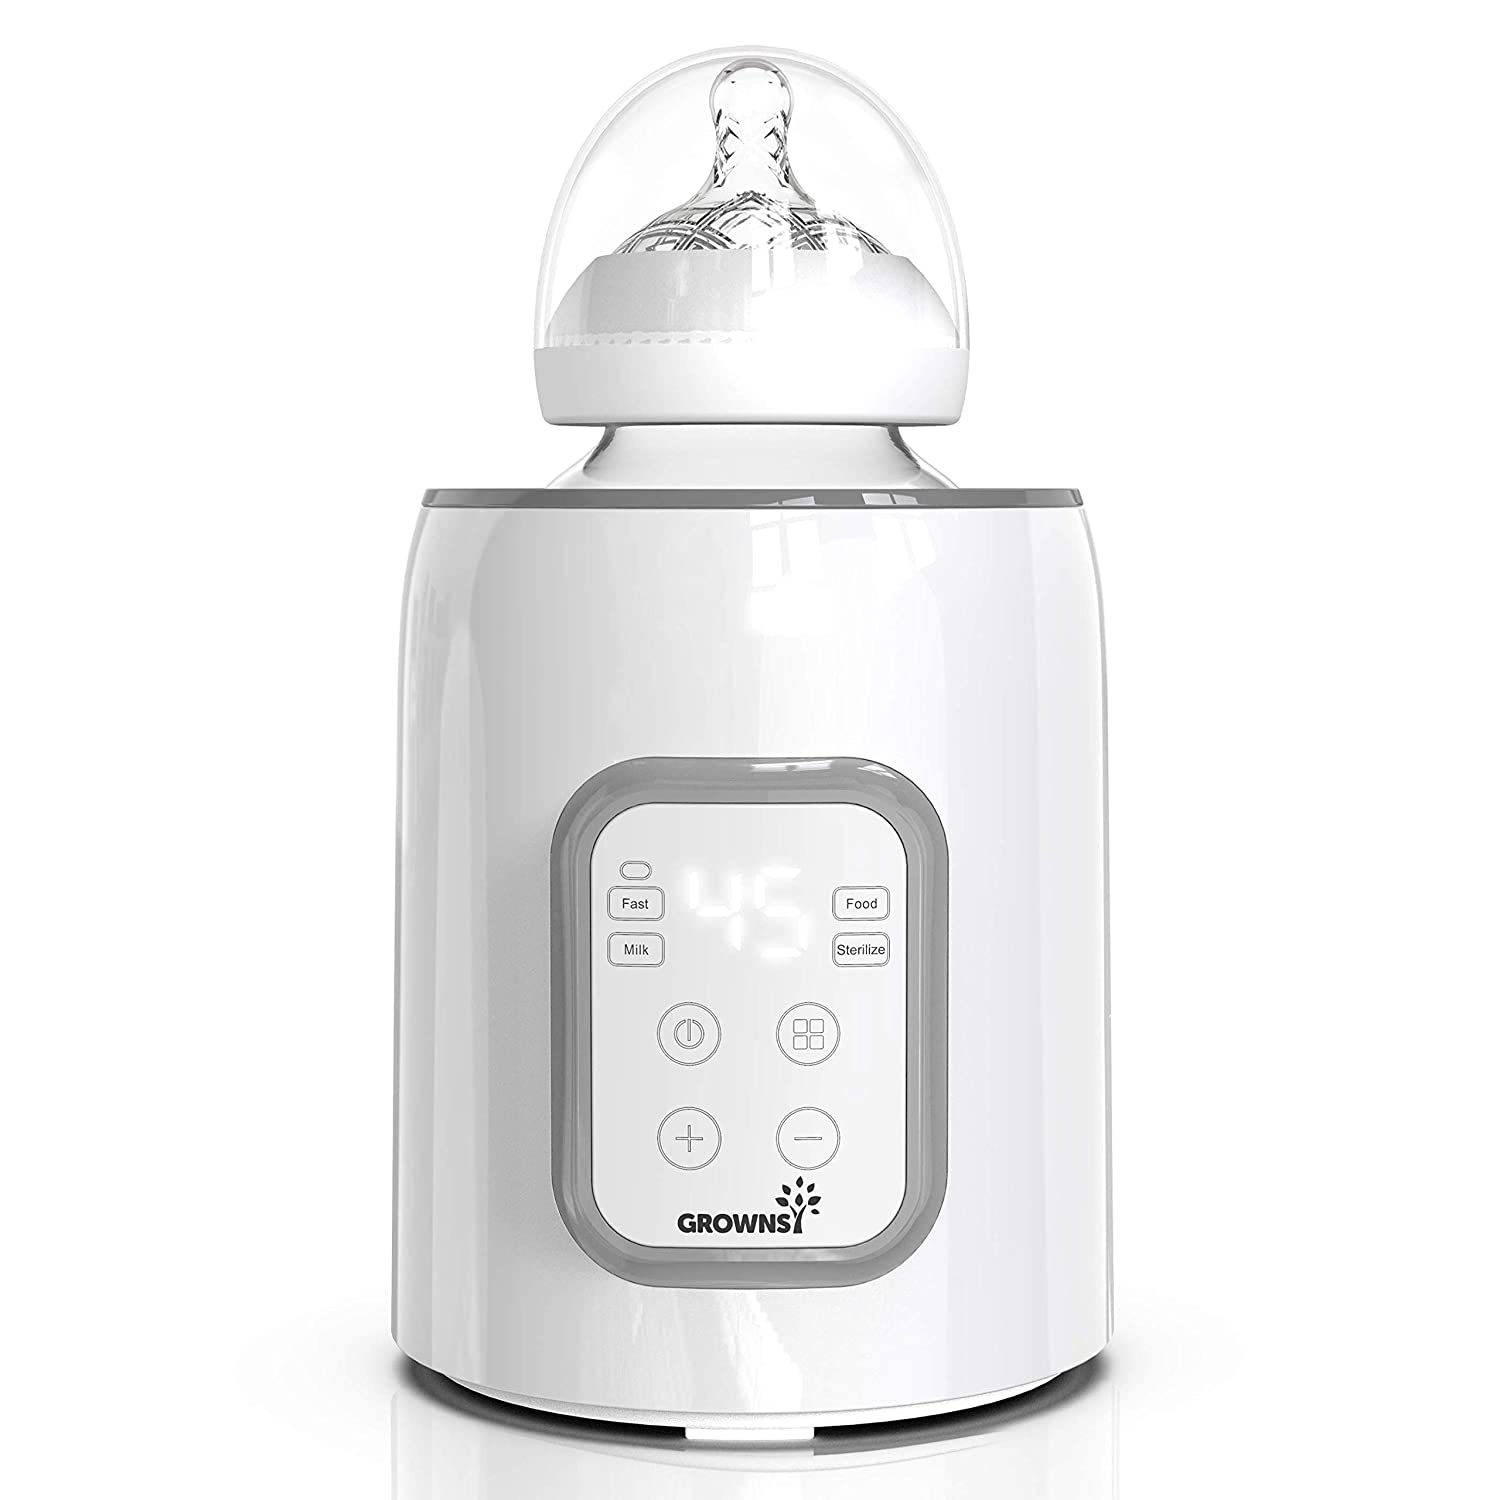 Carry-on milk warmer to make milk quickly during the journey